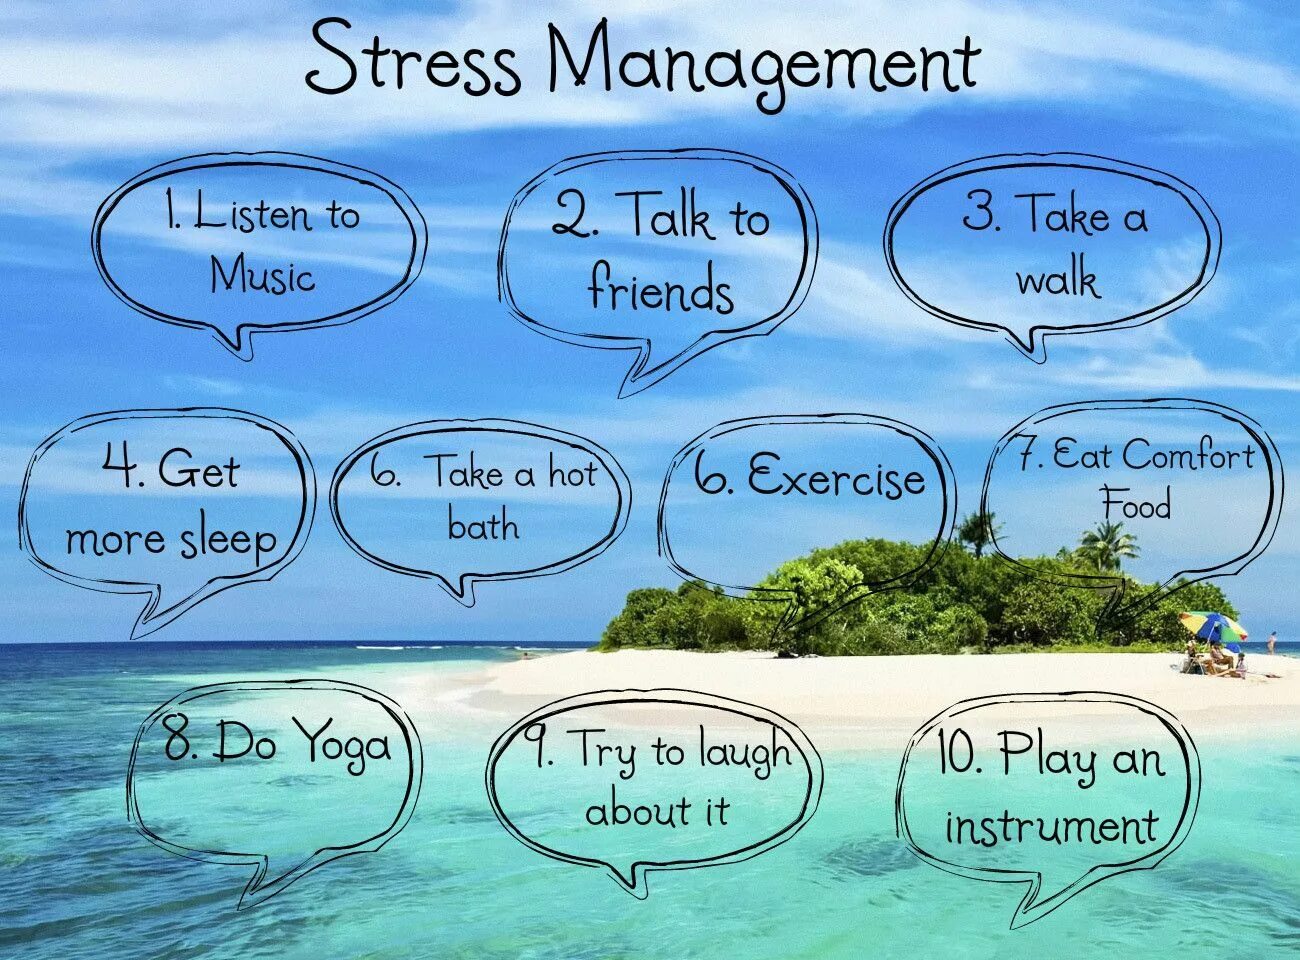 We are talking about this. Ways to Relax. Managing stress. Ways to reduce stress. To relieve stress.